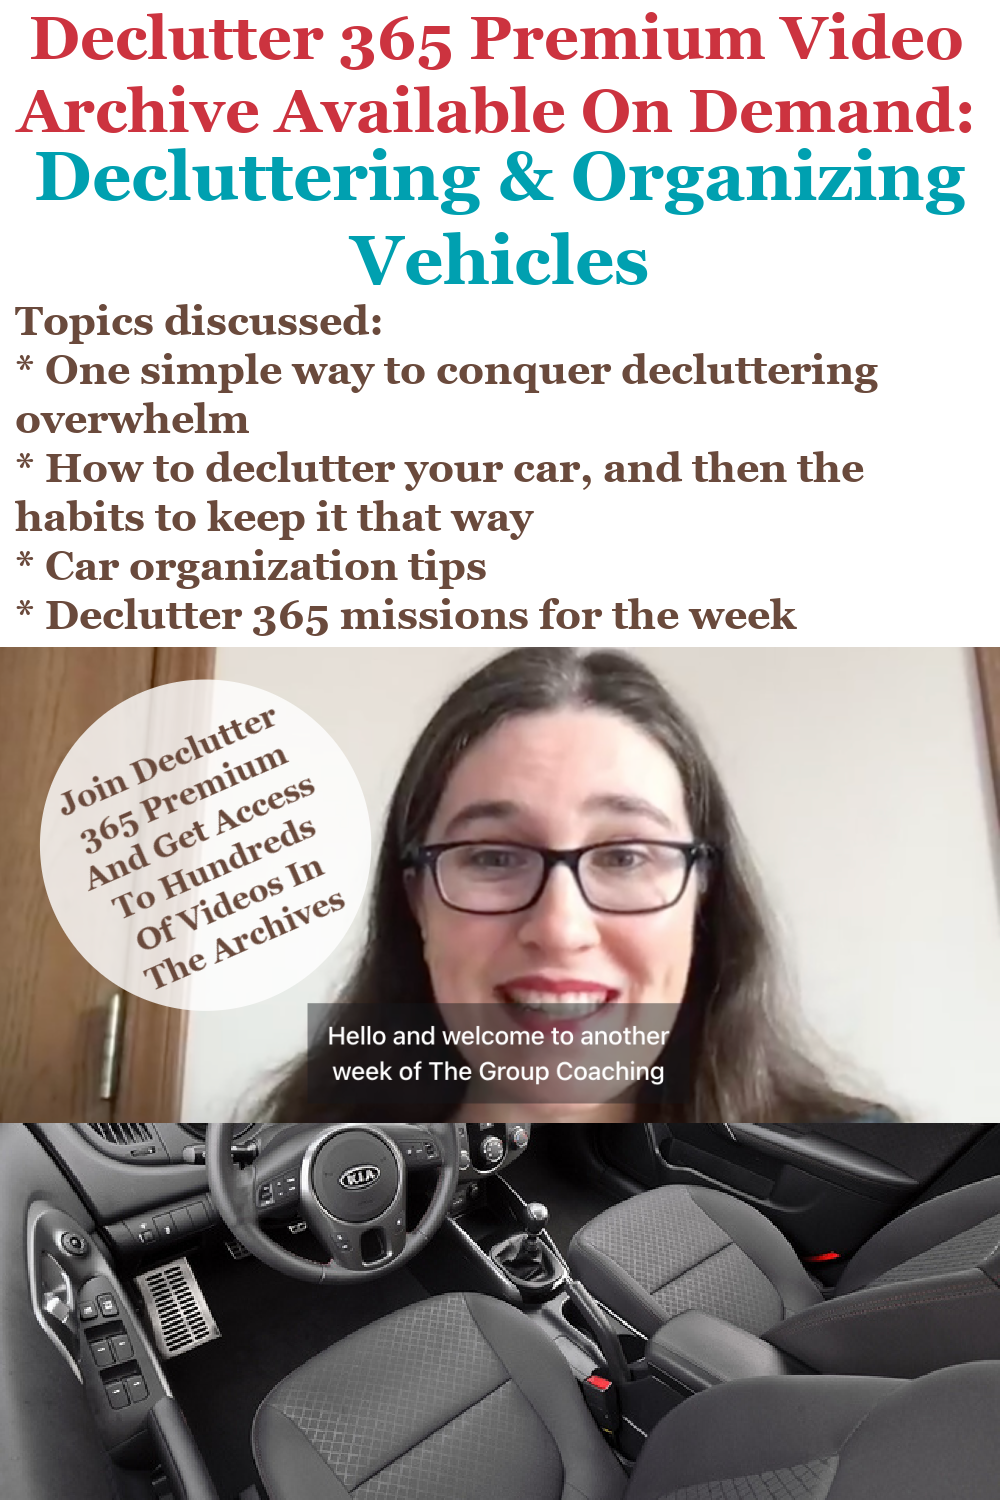 Declutter 365 Premium video archive available on demand all about decluttering and organizing vehicles, on Home Storage Solutions 101